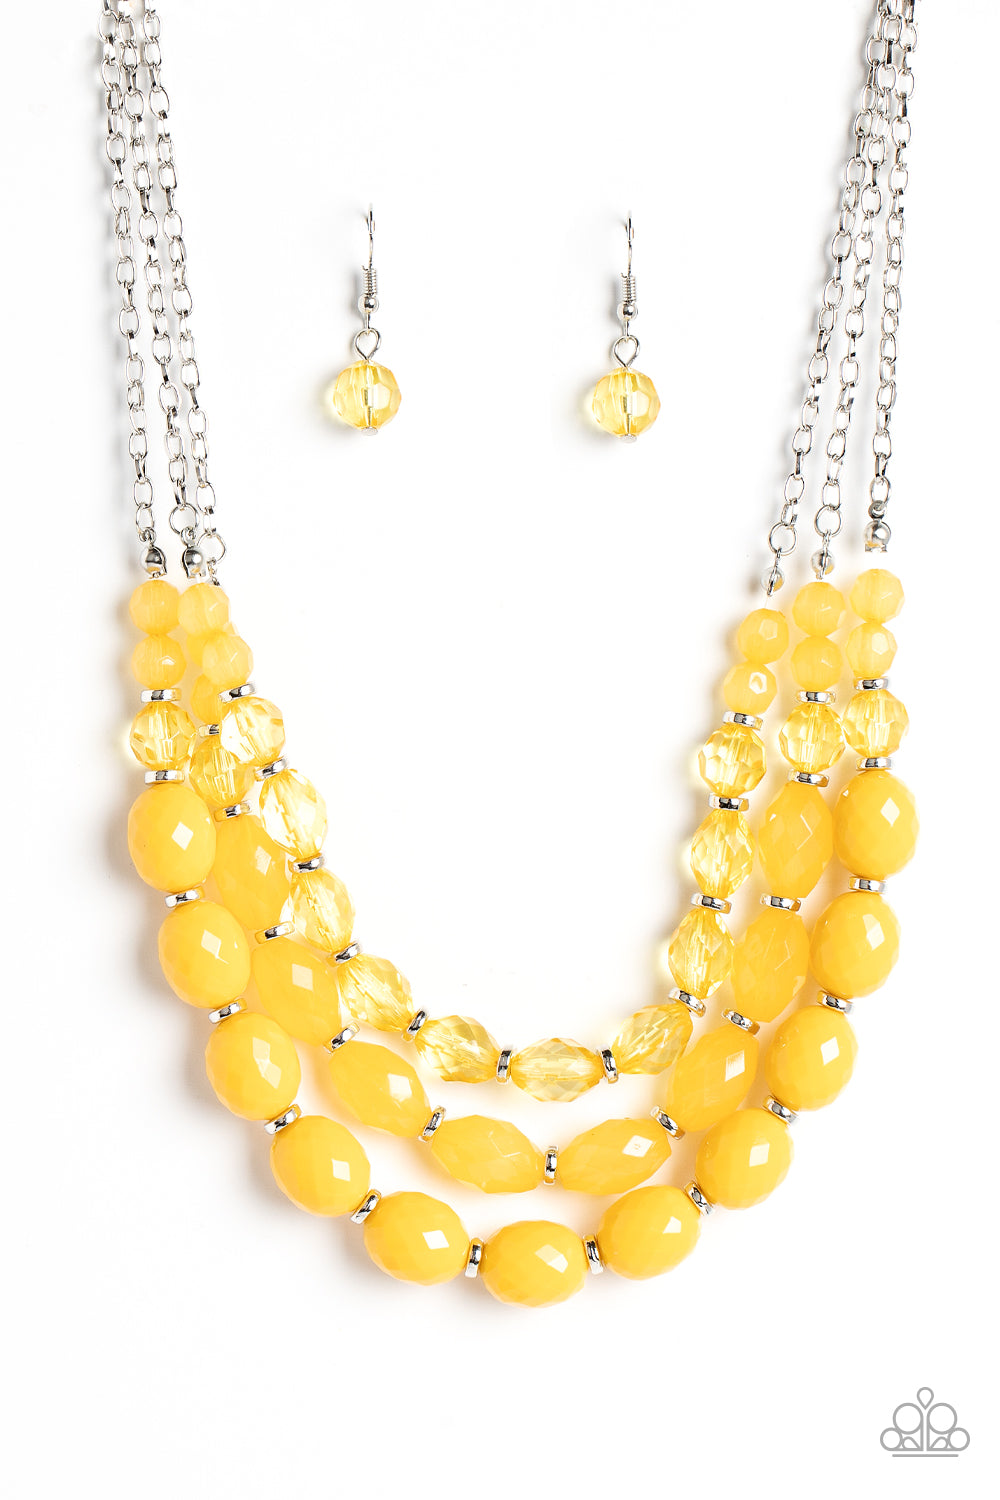 Tropical Hideaway Paparazzi Accessories Necklace with Earrings Yellow